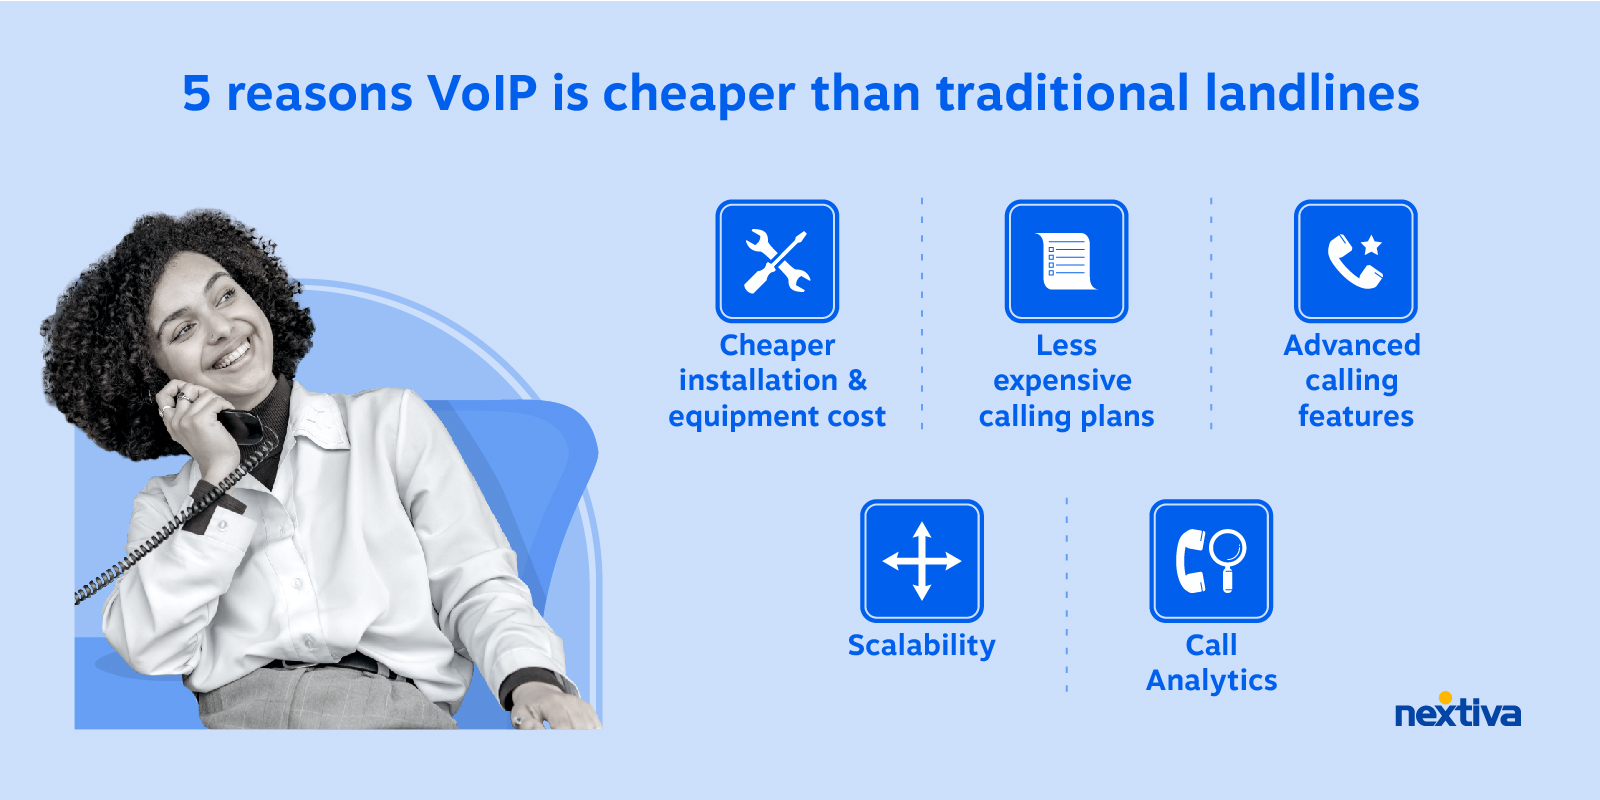 5 reasons VoIP is cheaper than traditional landlines  1. Cheaper installation and equipment cost 2. Less expensive calling plans 3. Advanced calling features 4. Scalability 5. Call Analytics